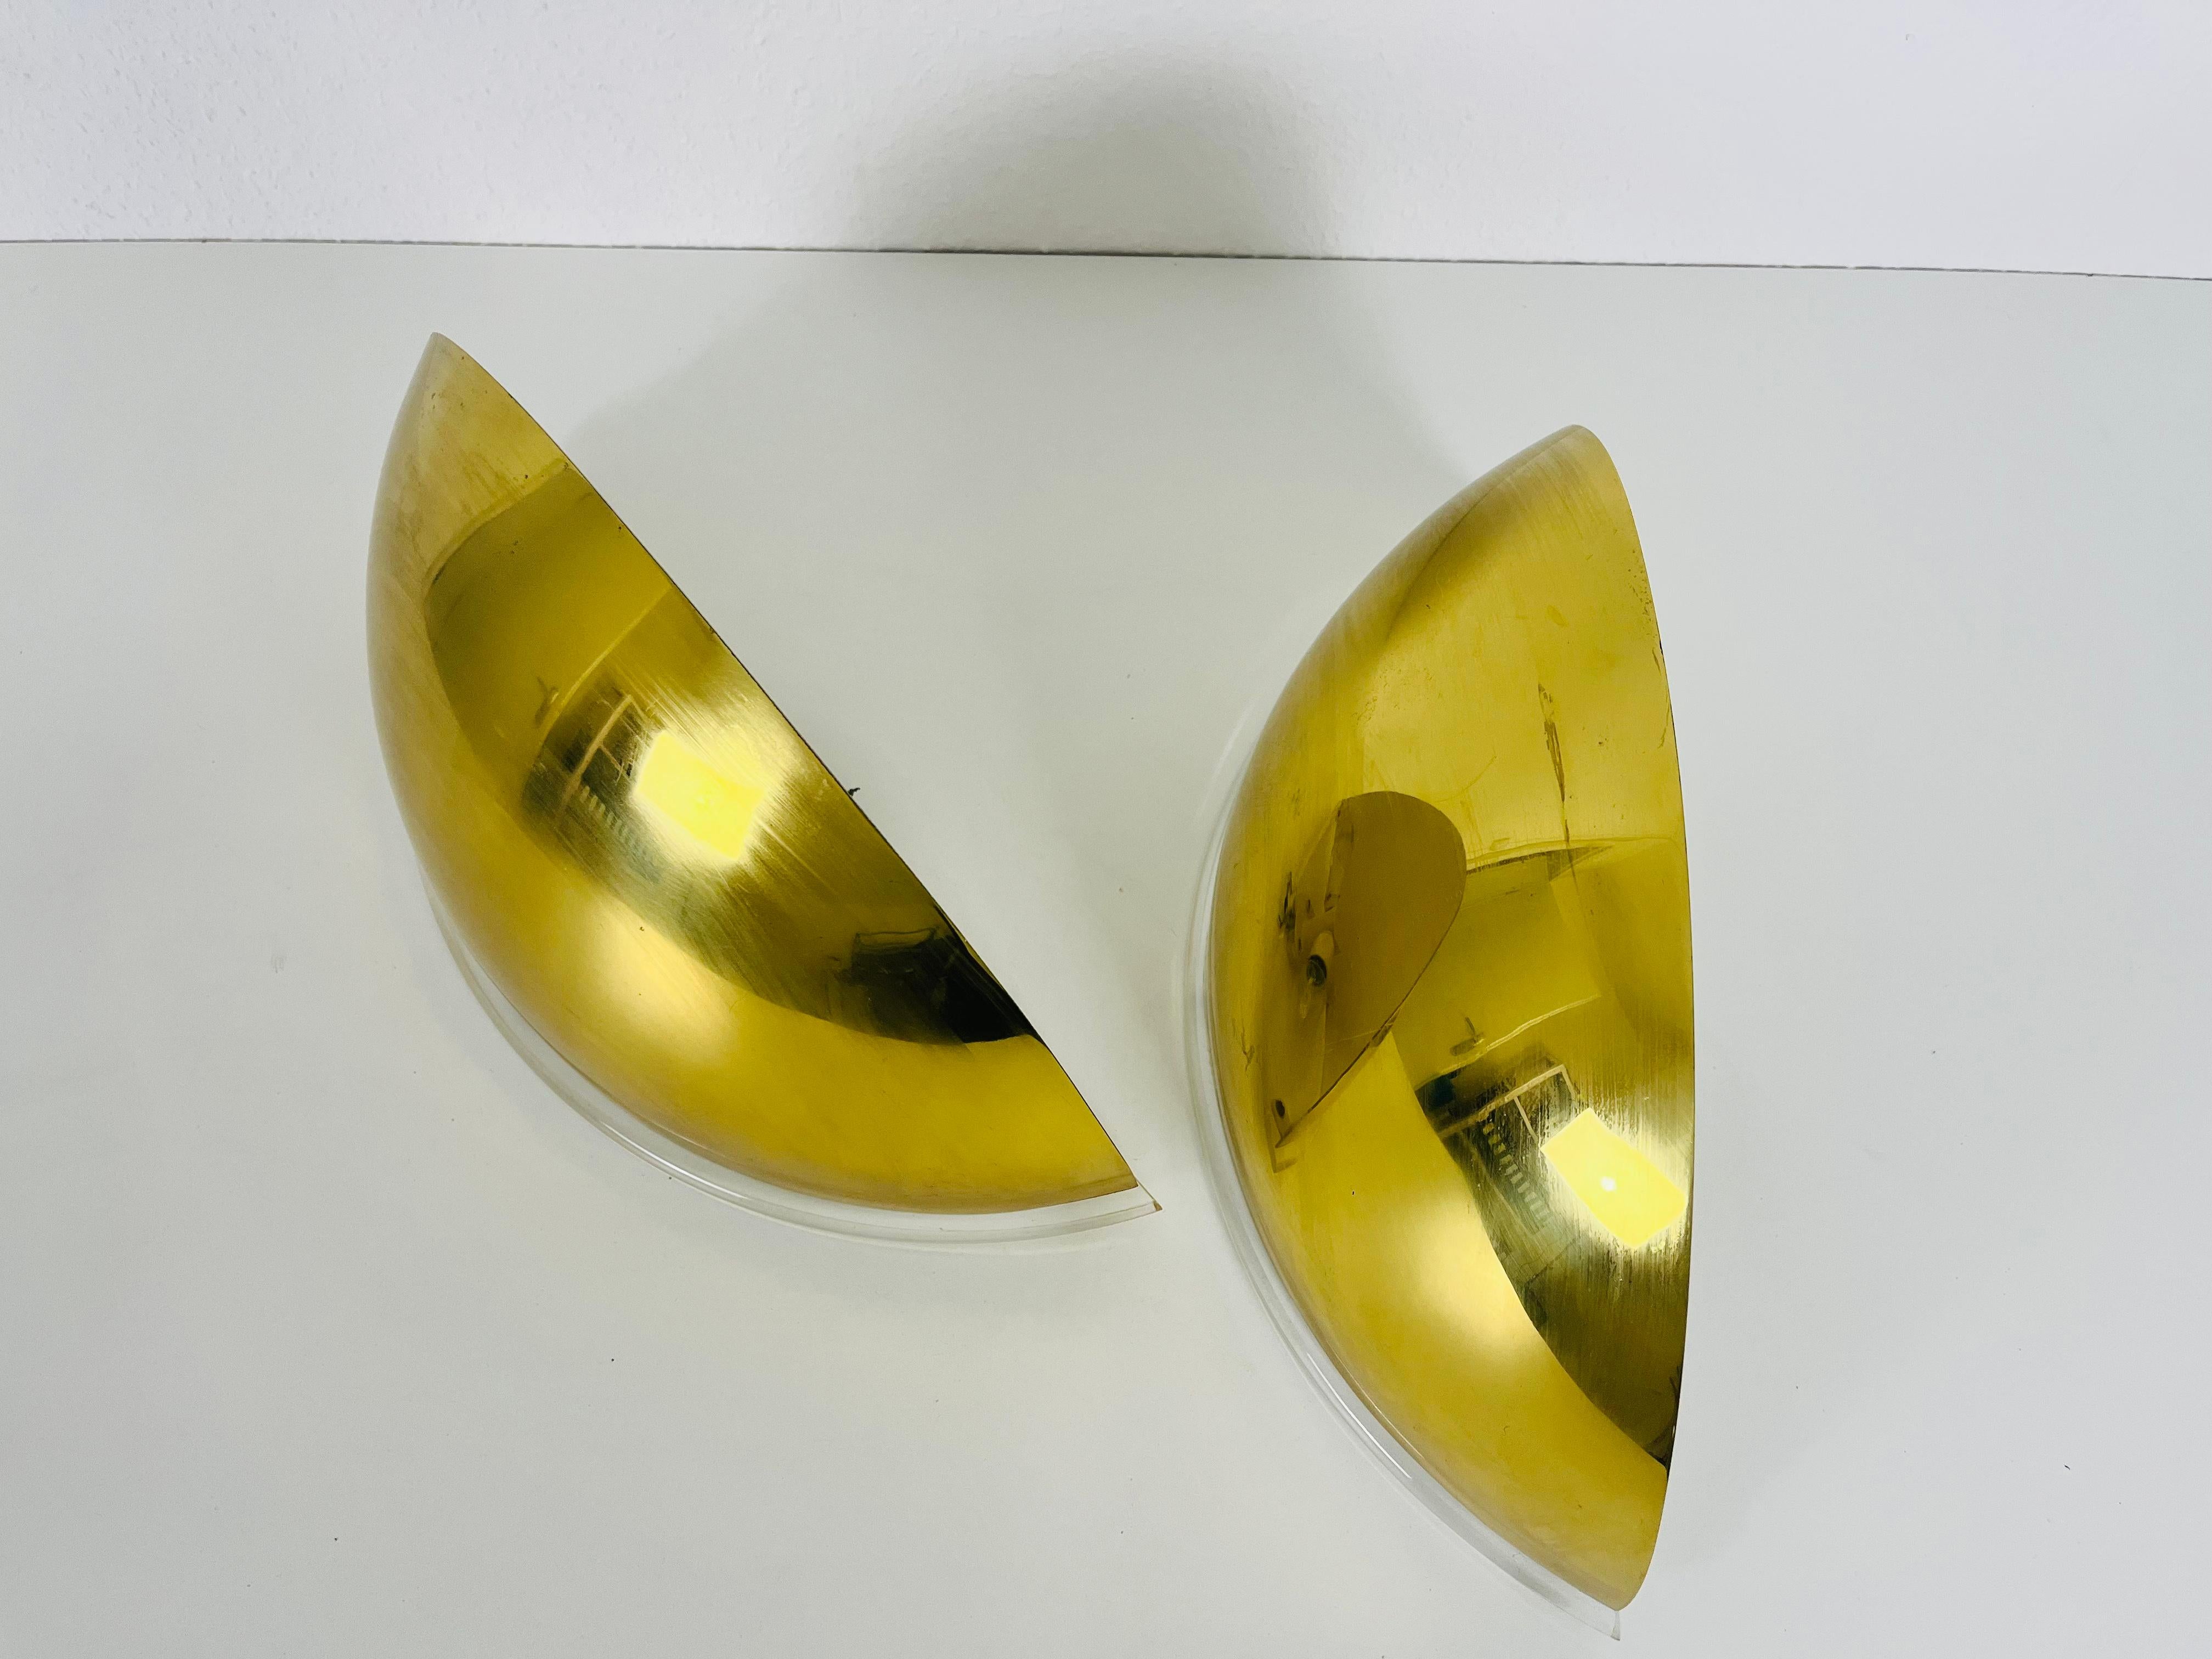 Pair of Florian Schulz Midcentury Brass Wall Lamps, 1970s For Sale 1